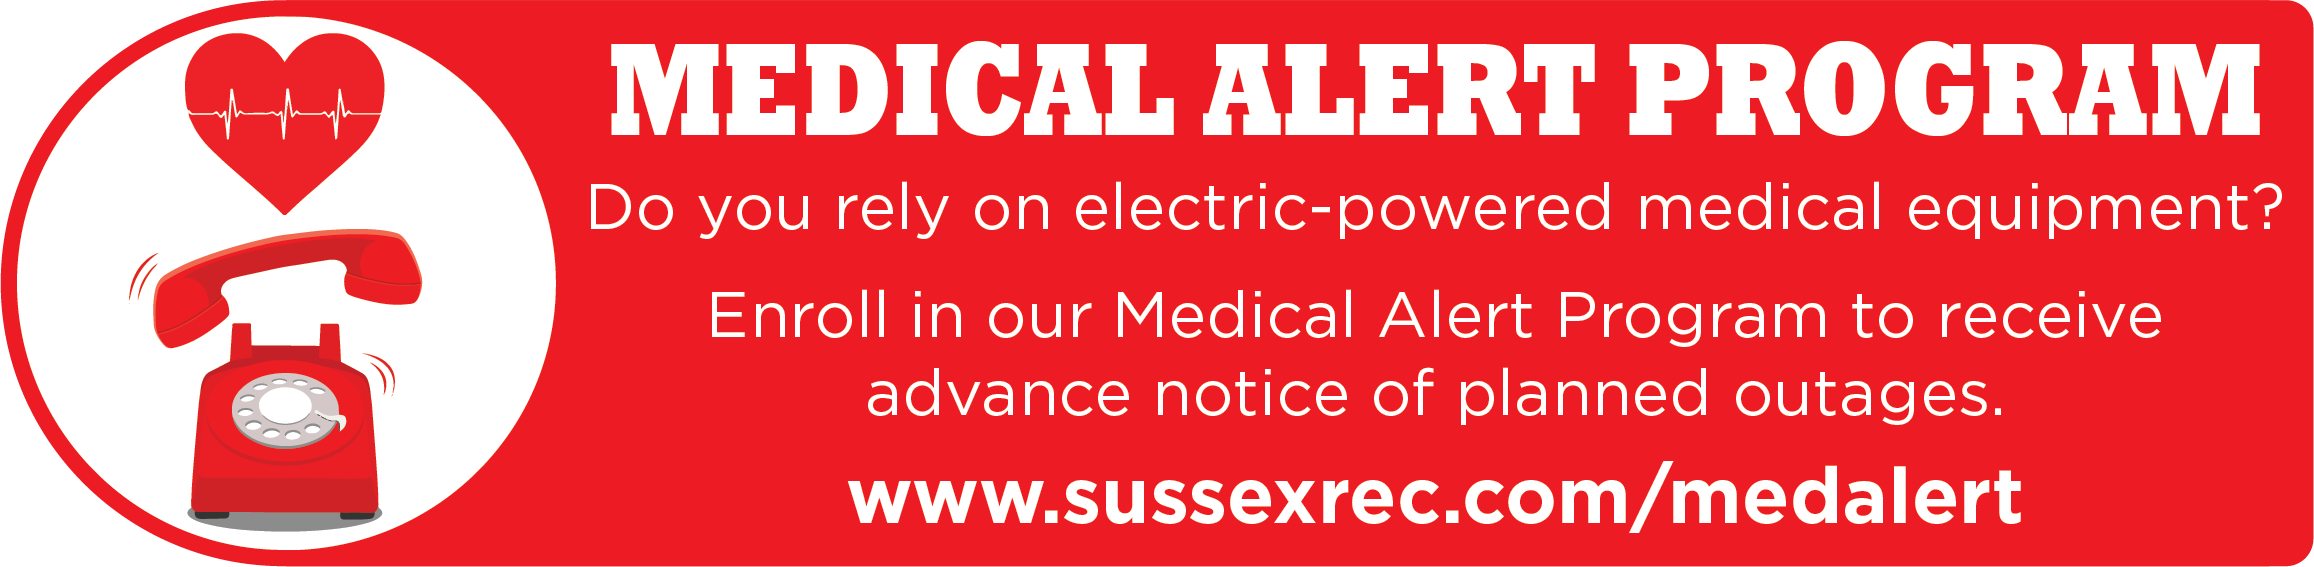 MEDICAL ALERT PROGRAM. Do you rely on electric-powered medical equipment? Enroll in our Medical Alert Program to receive advance notice of planned outages. www.sussexrec.com/medalert